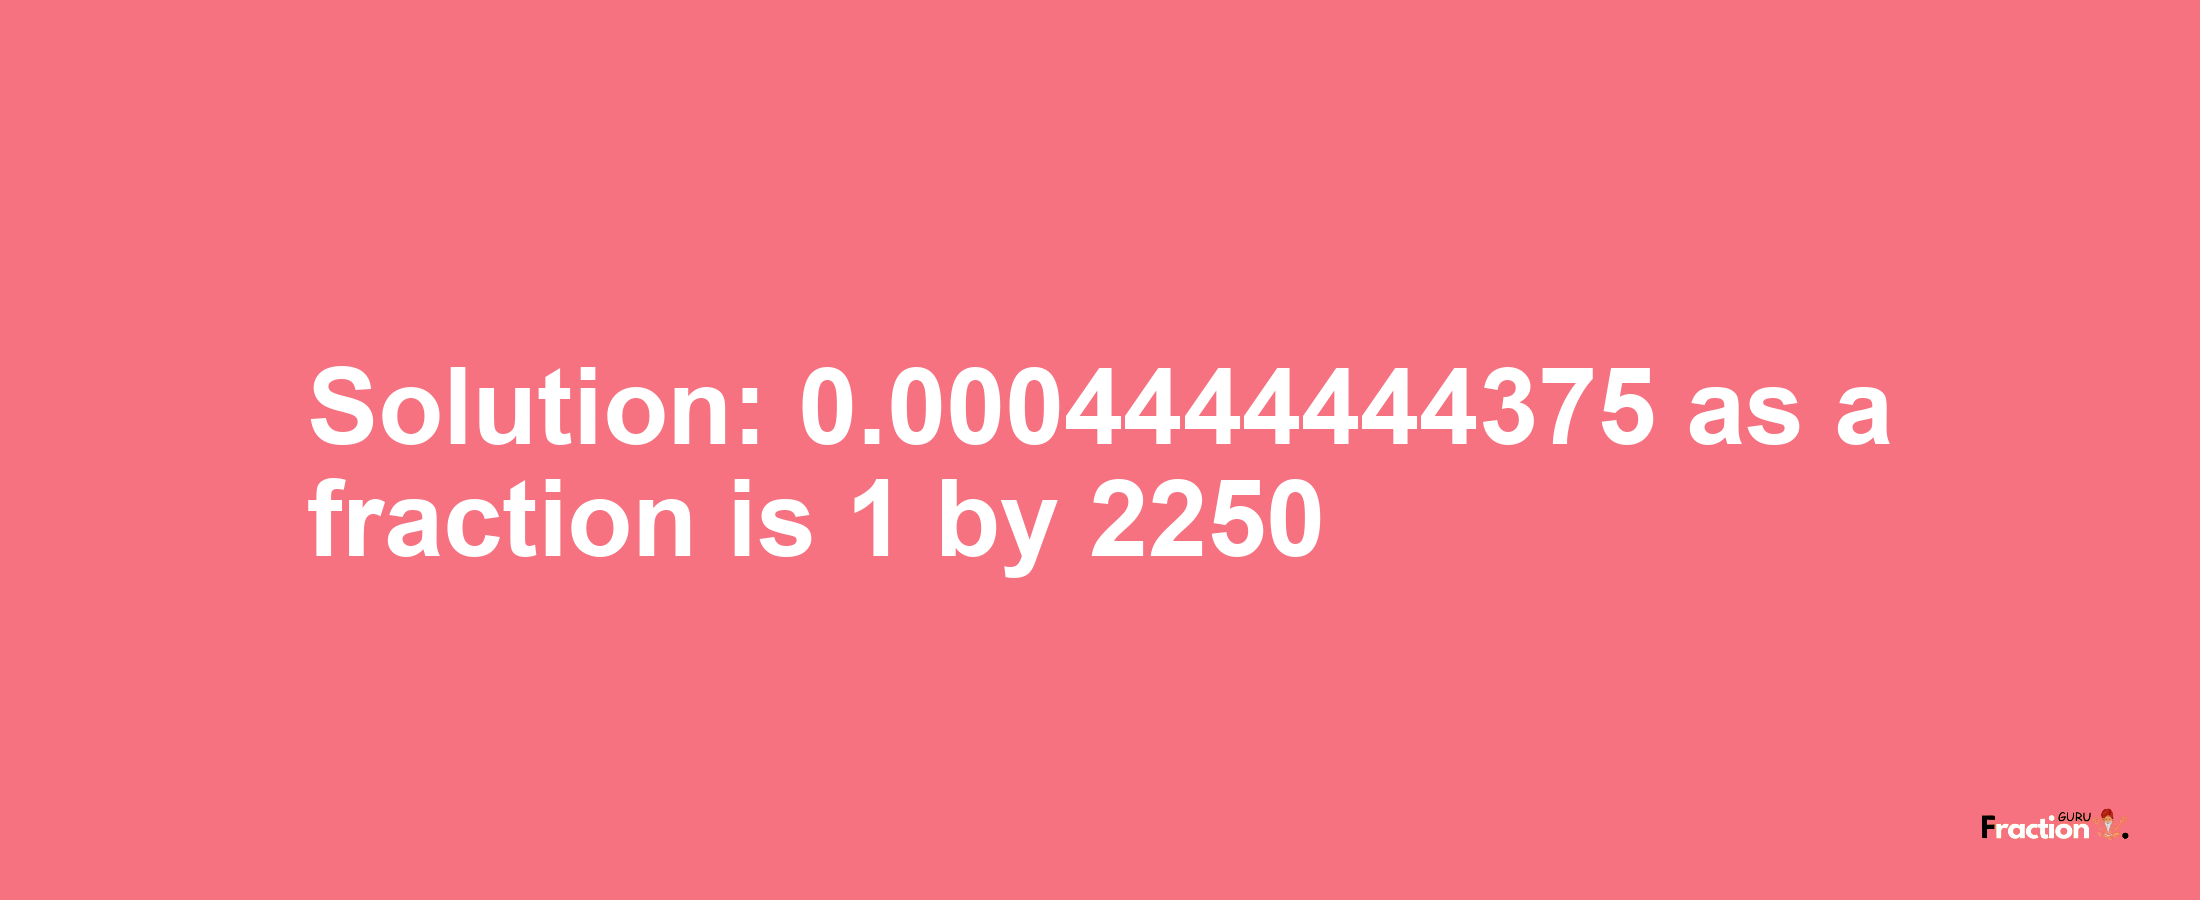 Solution:0.0004444444375 as a fraction is 1/2250